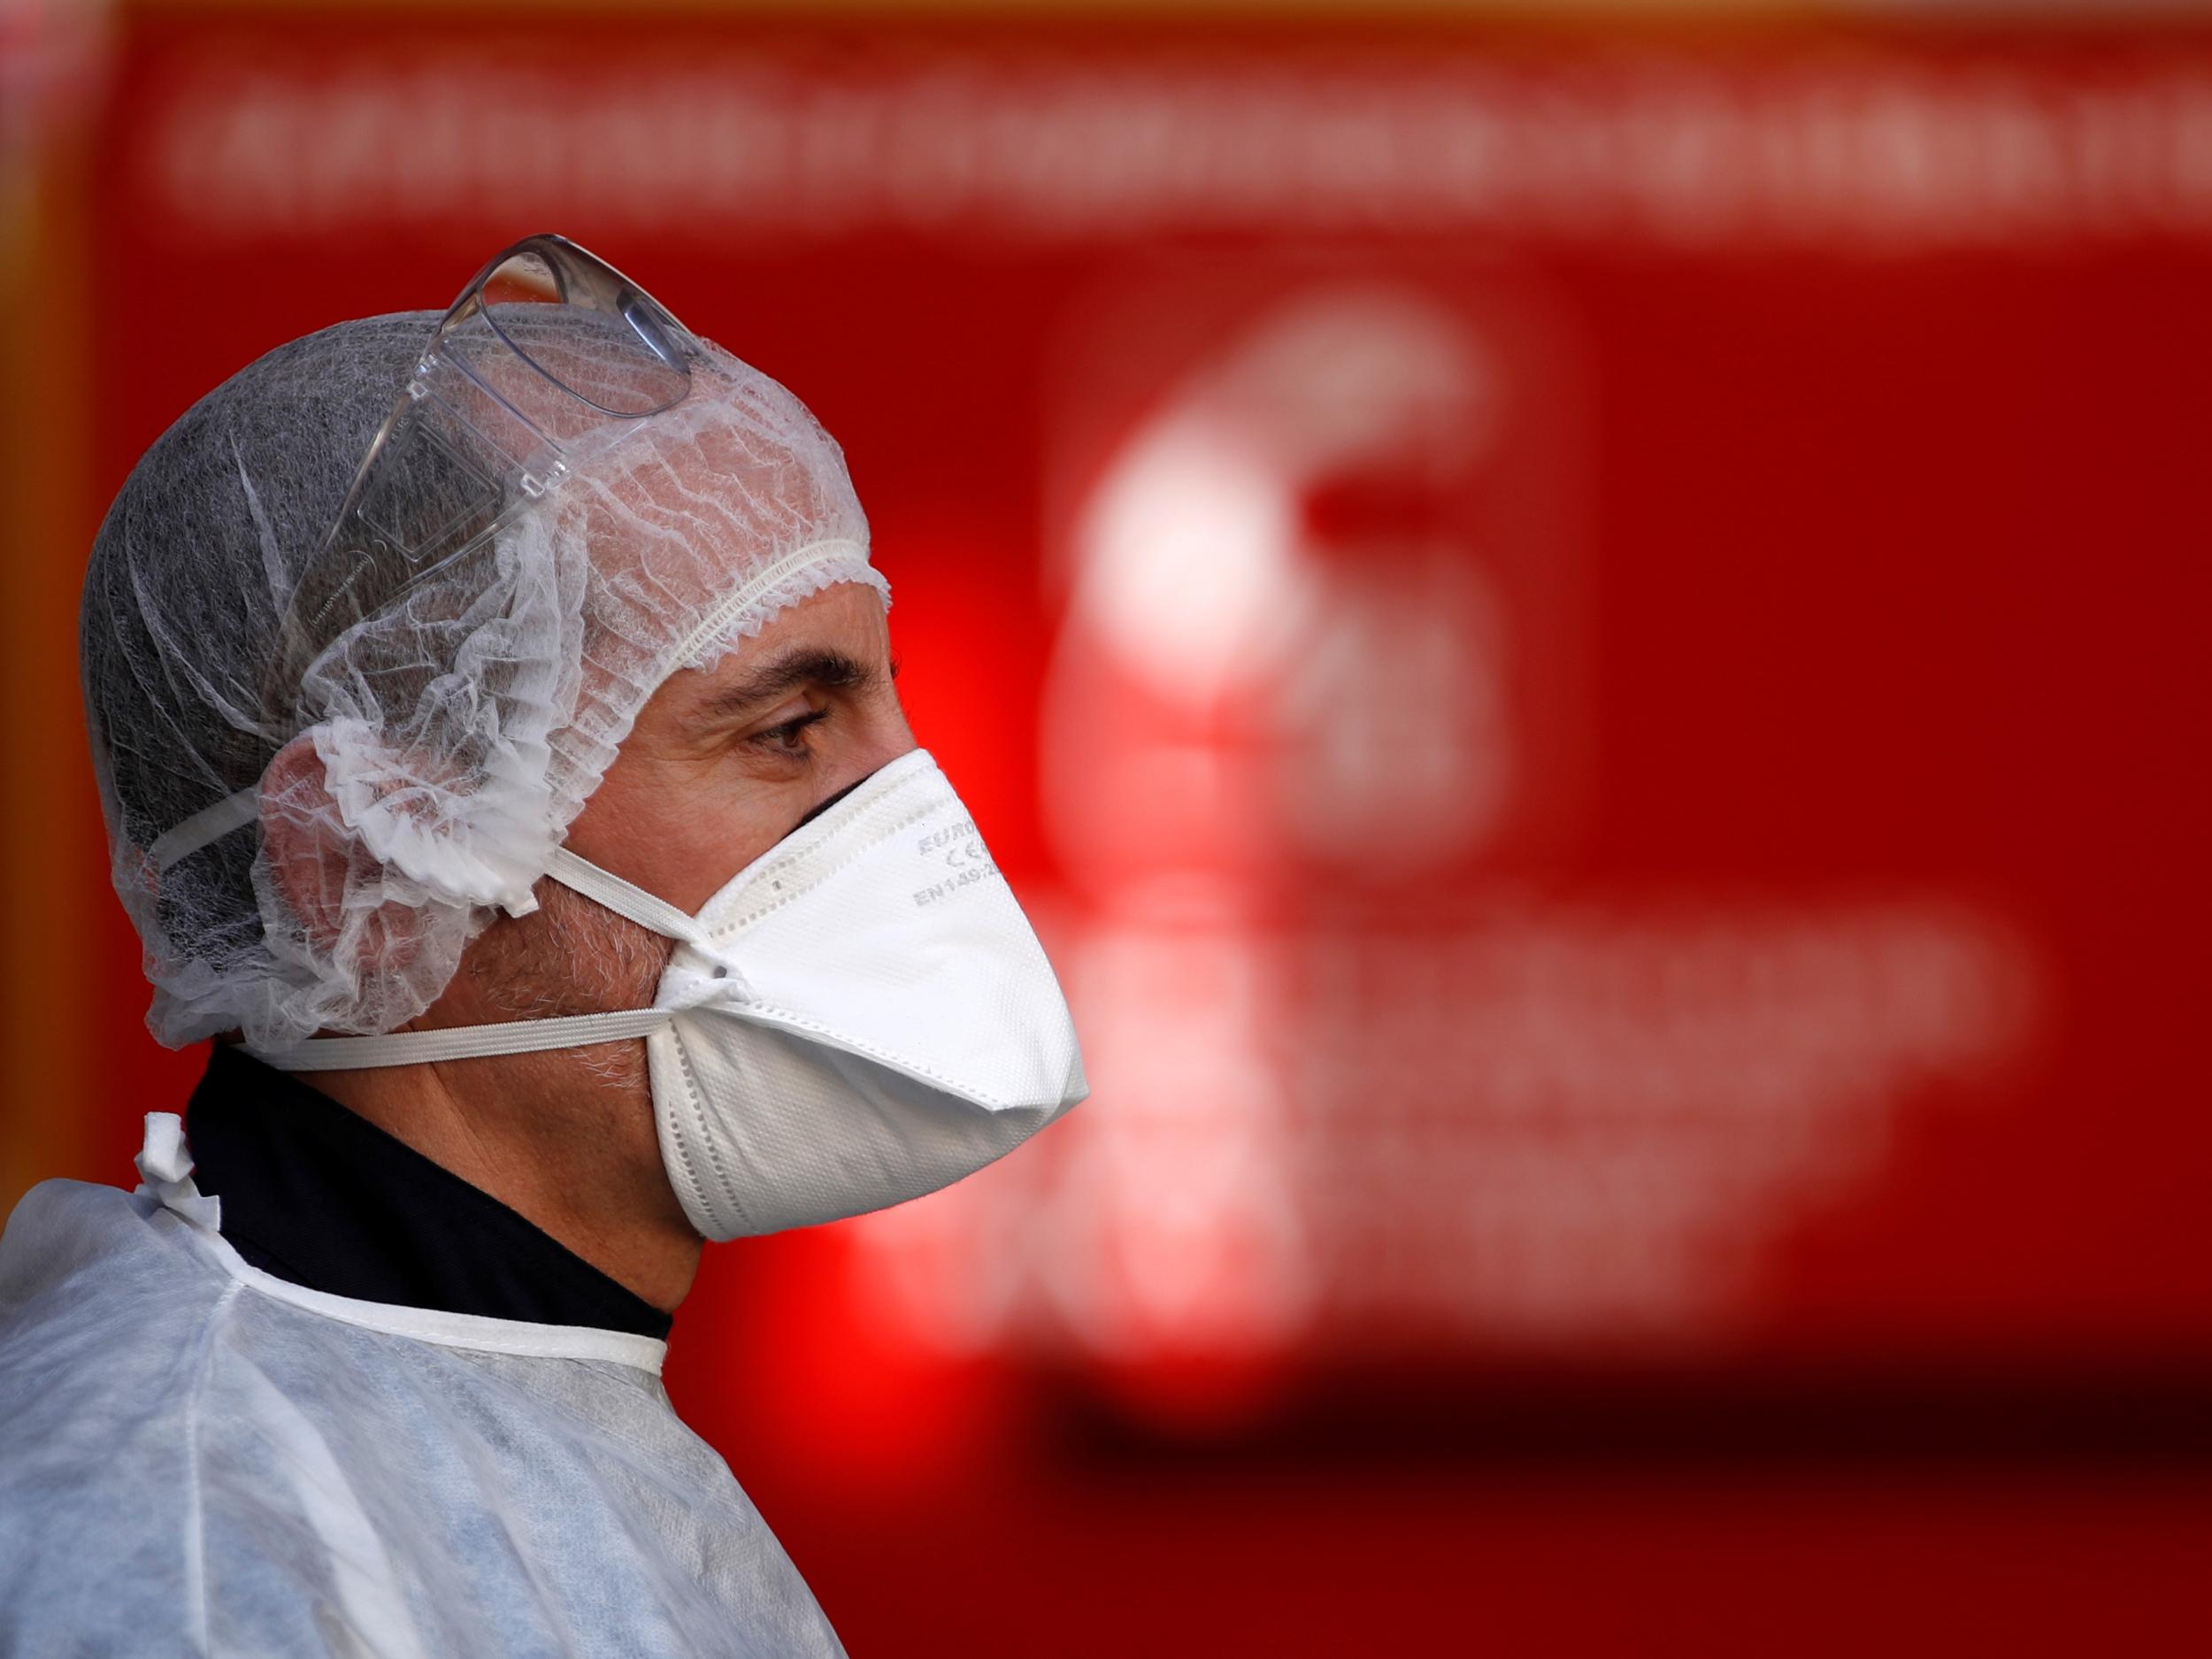 A member of an ambulance crew during a rescue operation in Strasbourg as the spread of the coronavirus disease (Covid-19) continues in France, 27 March, 2020